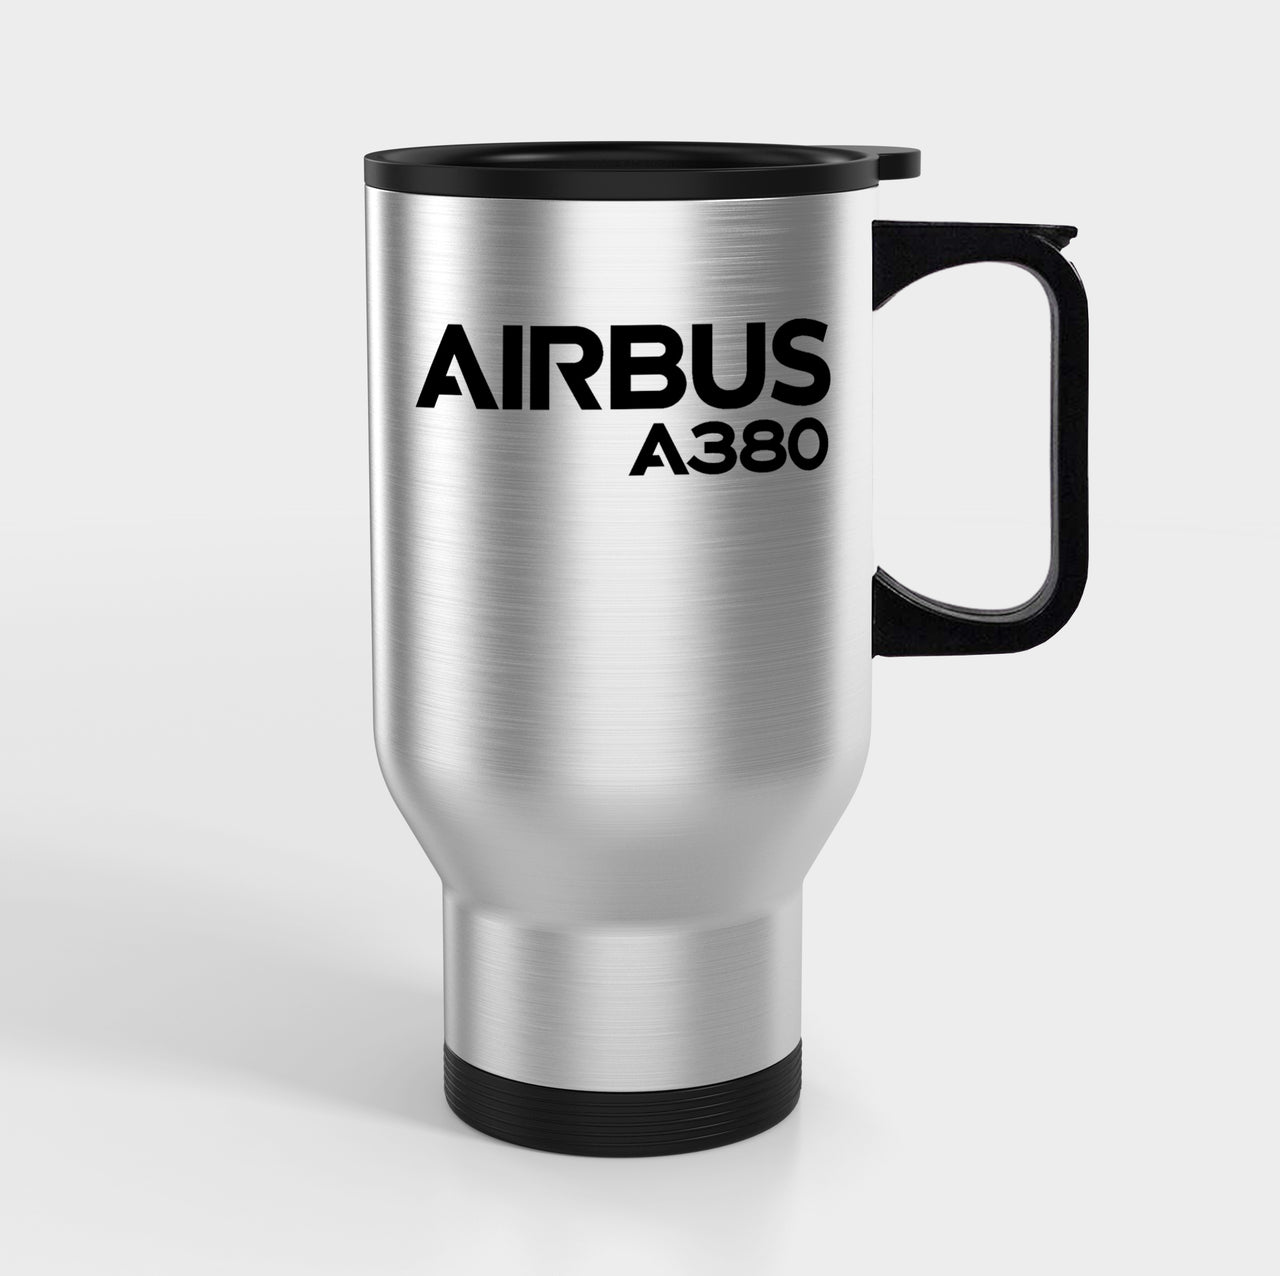 Airbus A380 & Text Designed Travel Mugs (With Holder)